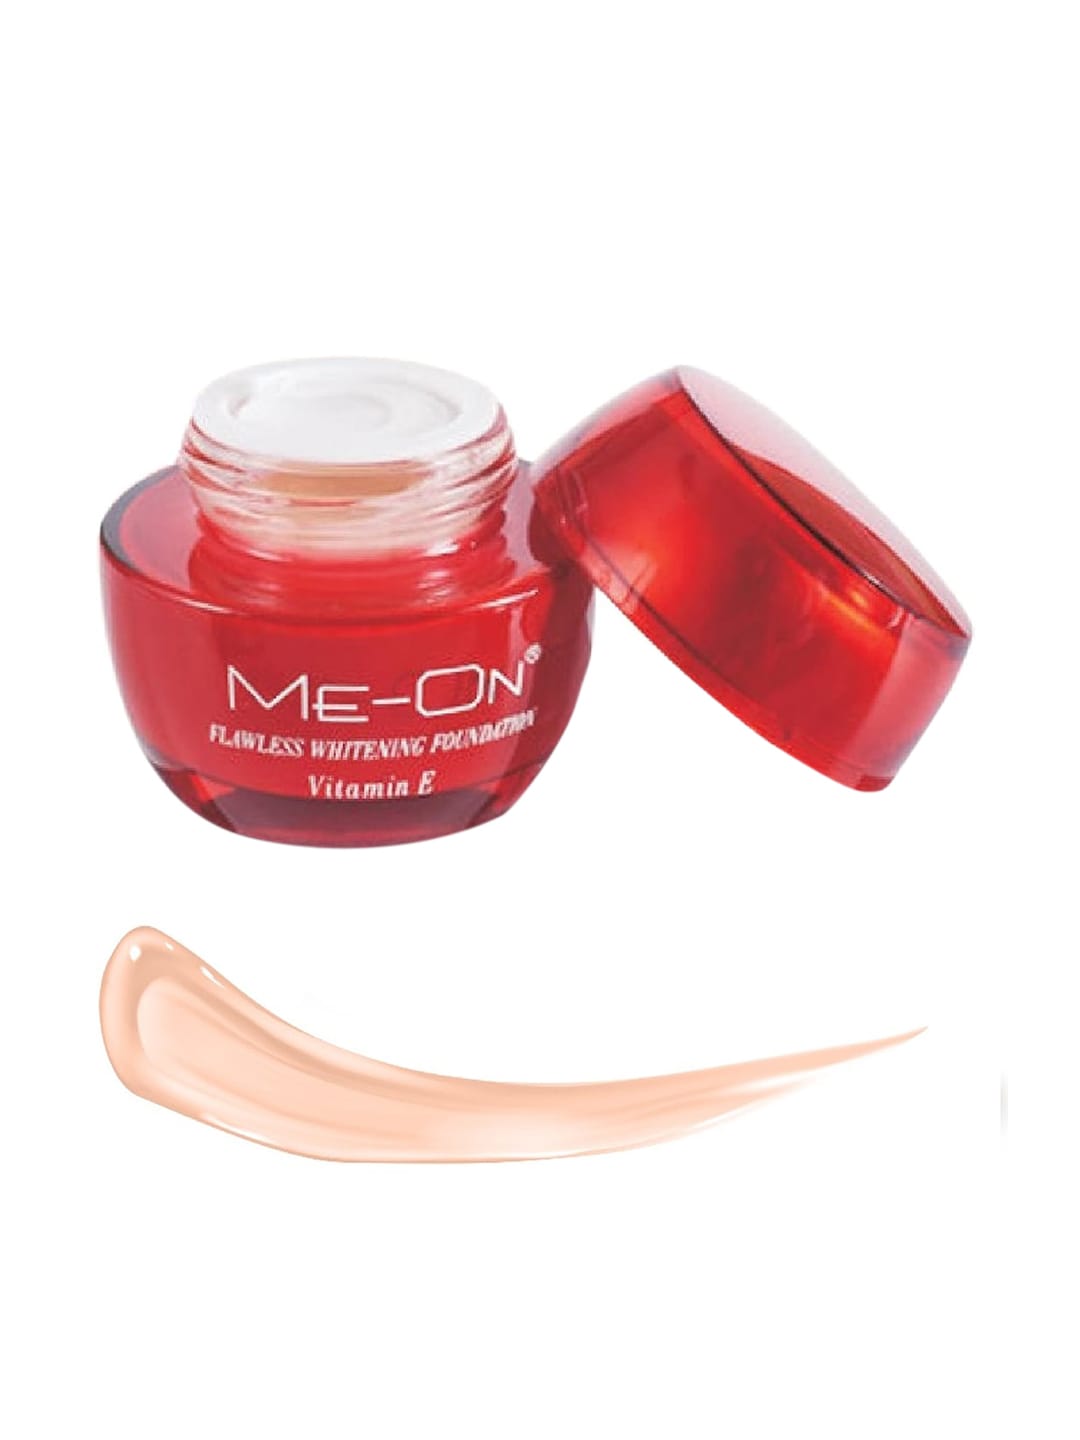 ME-ON Whitening Foundation - Shade 23 Price in India